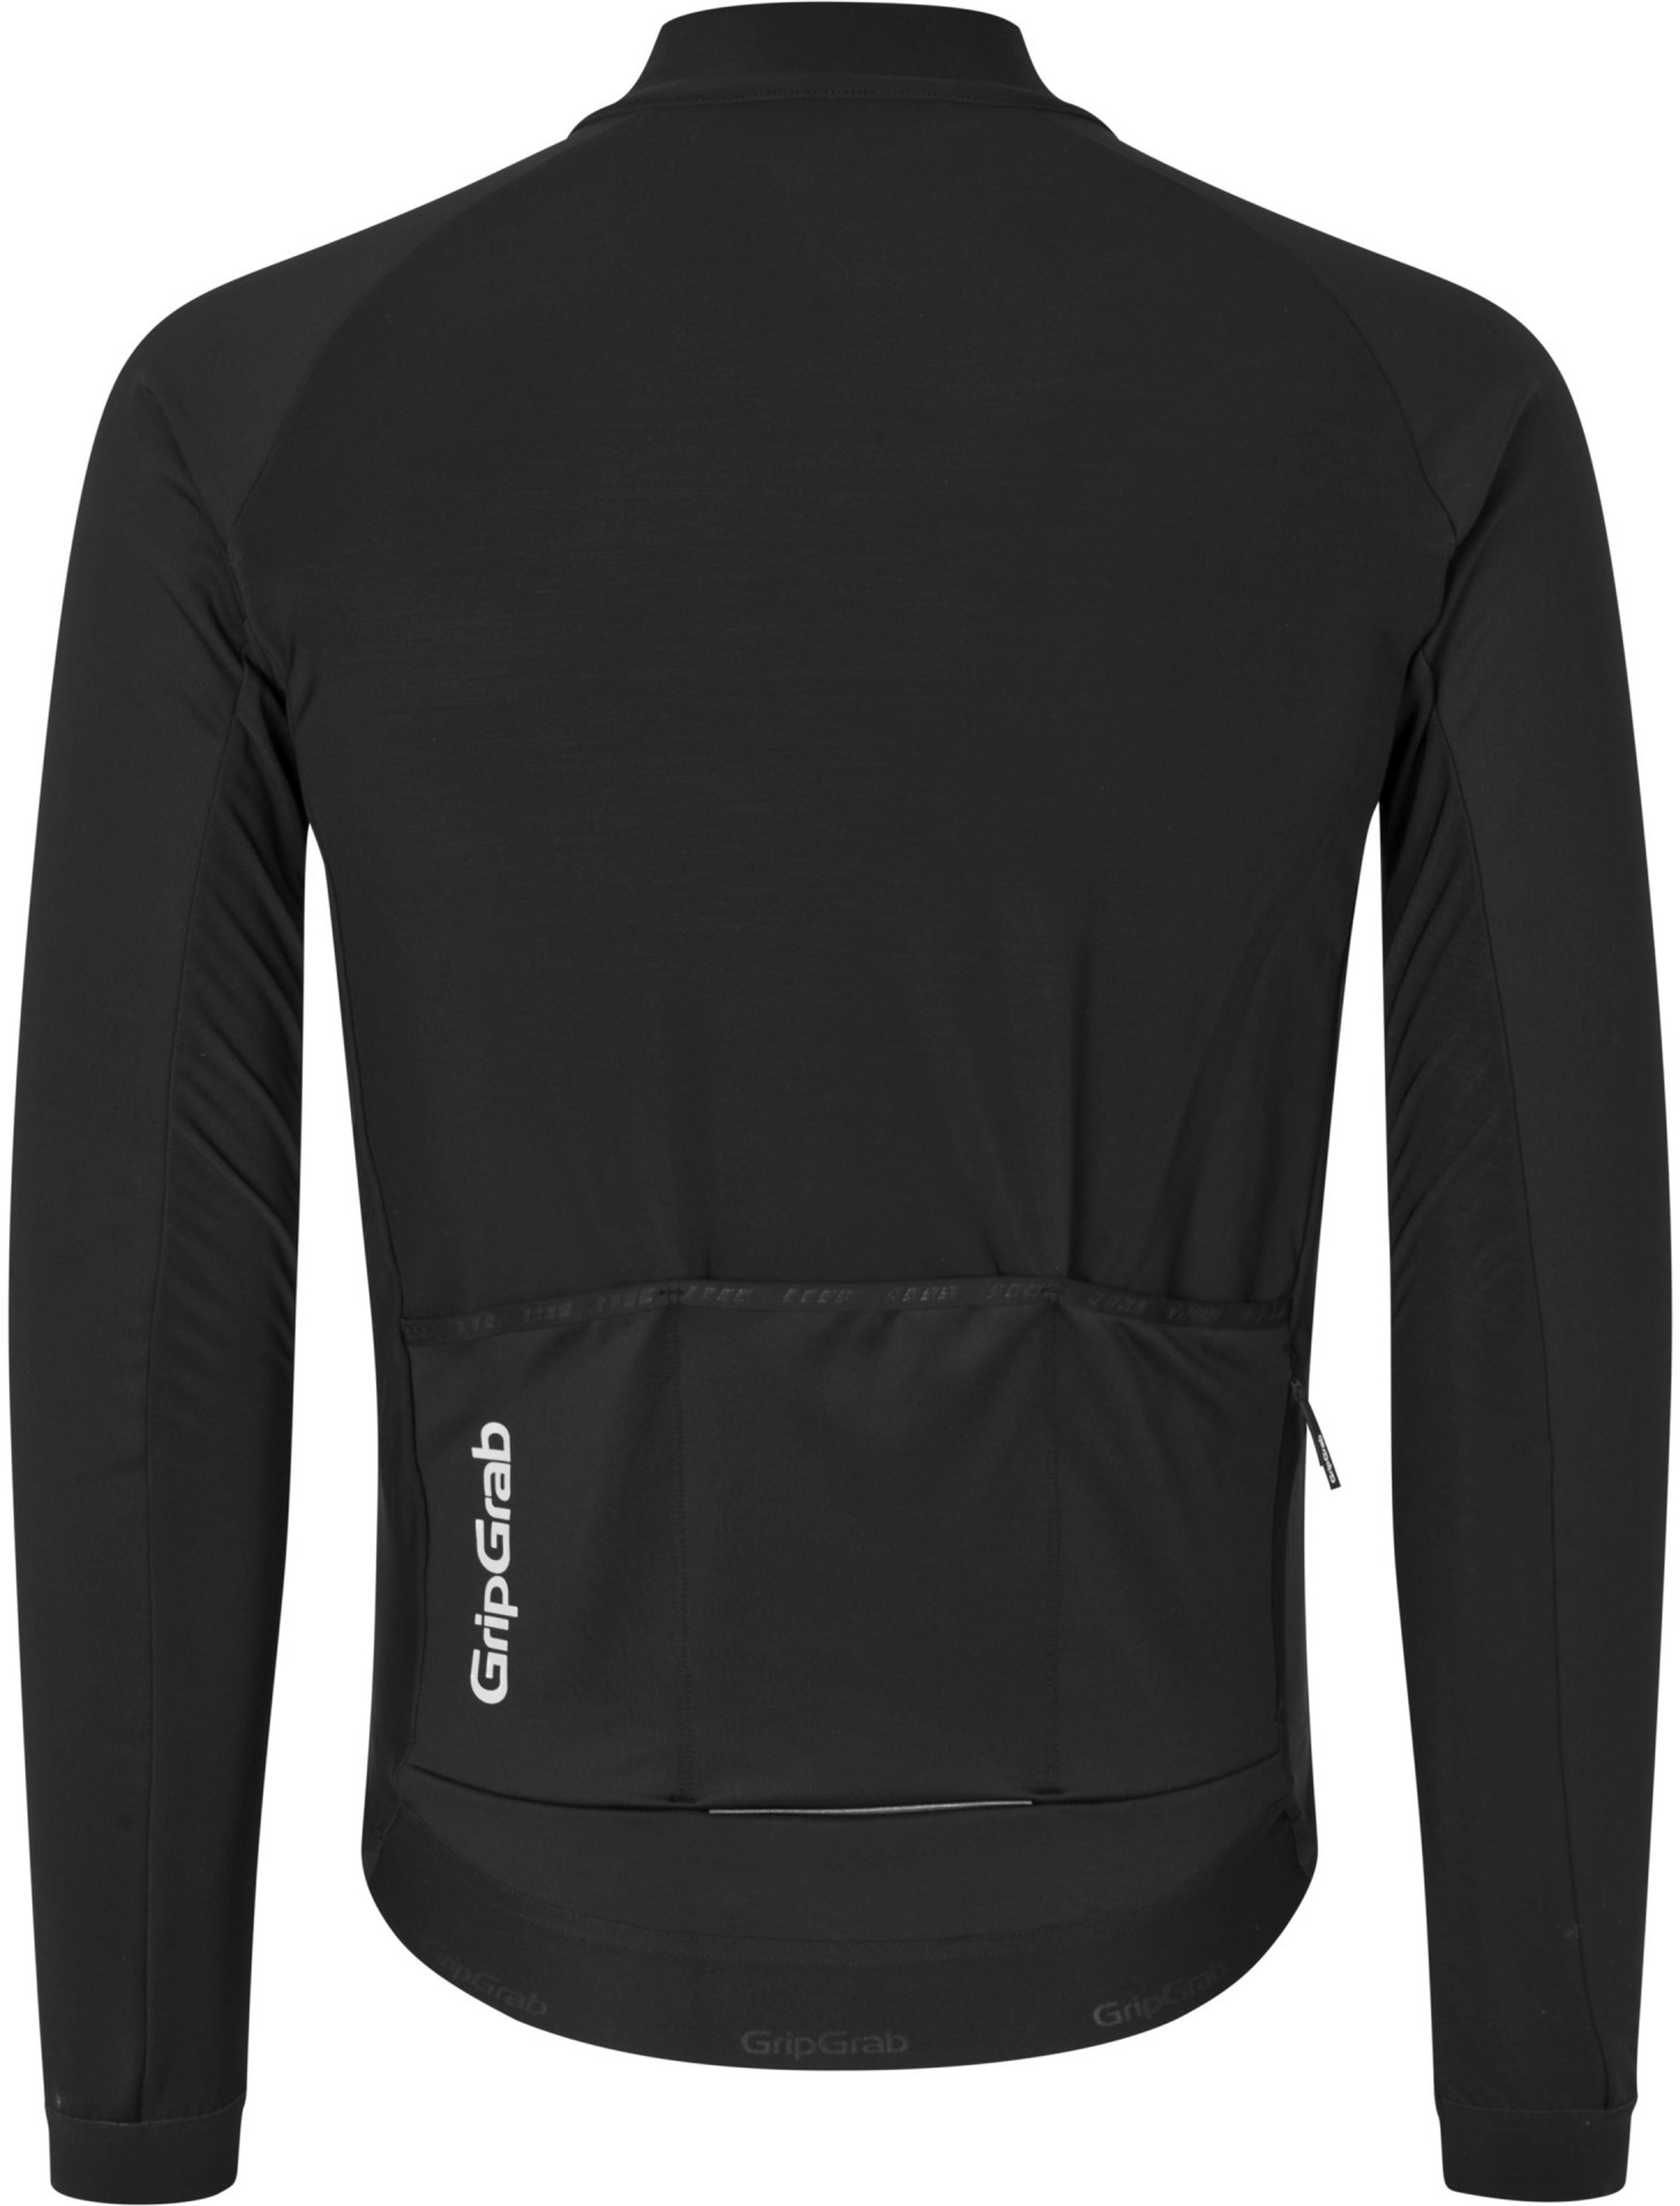 GripGrab ThermaShell Windproof Winter Jacket | Wiggle